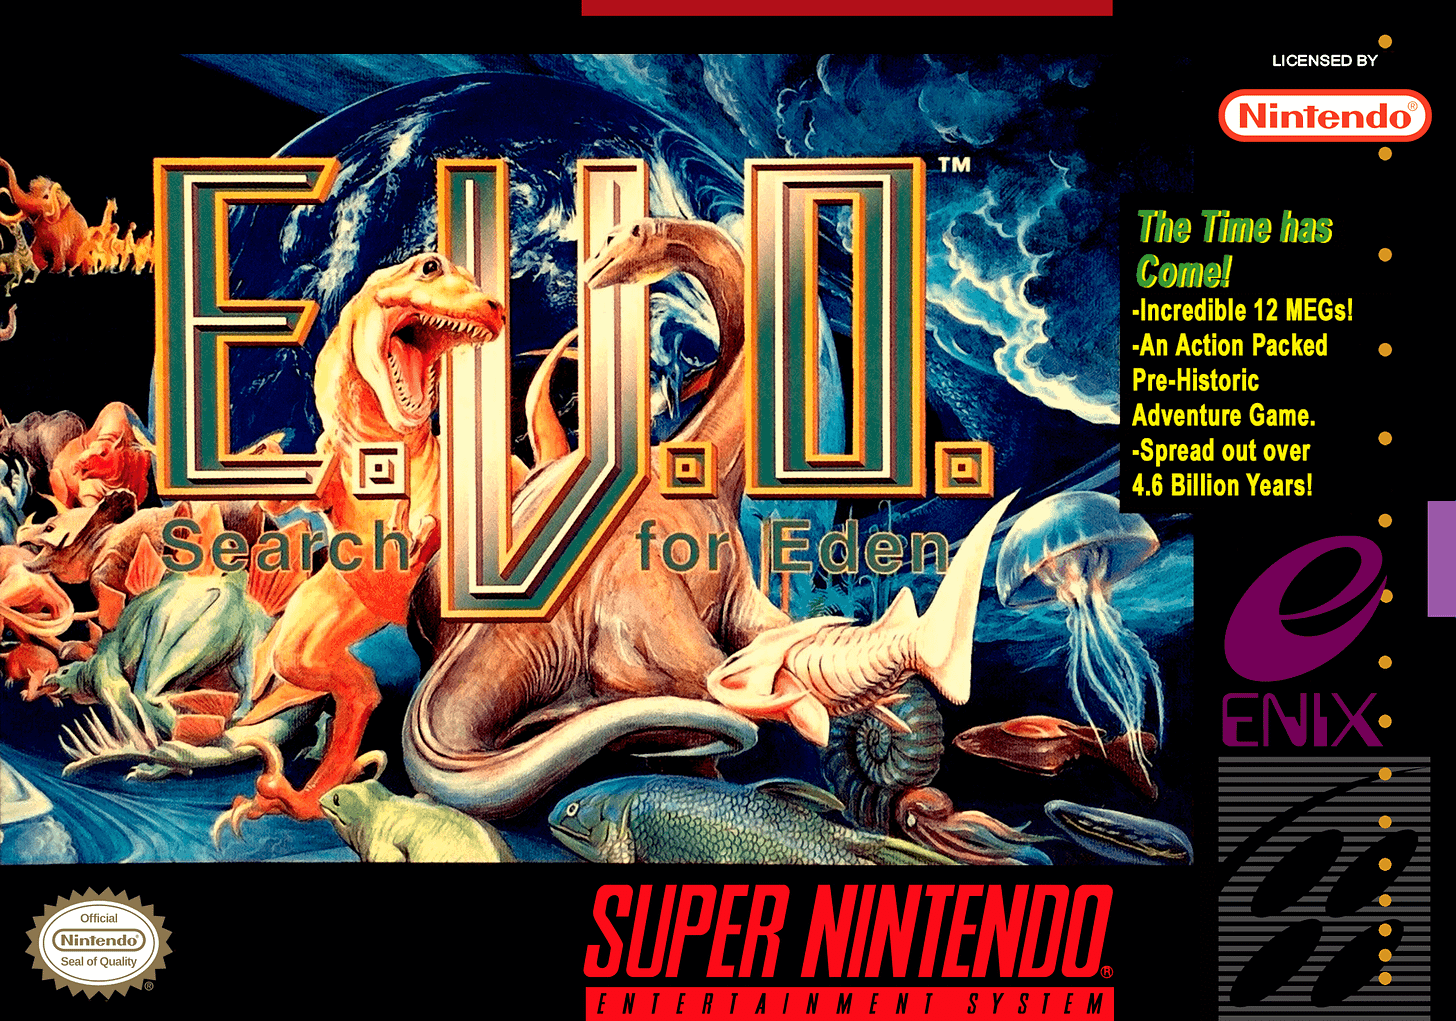 The North American box art for E.V.O., featuring fish, dinosaurs, and more life you'll encounter in your quest through time.